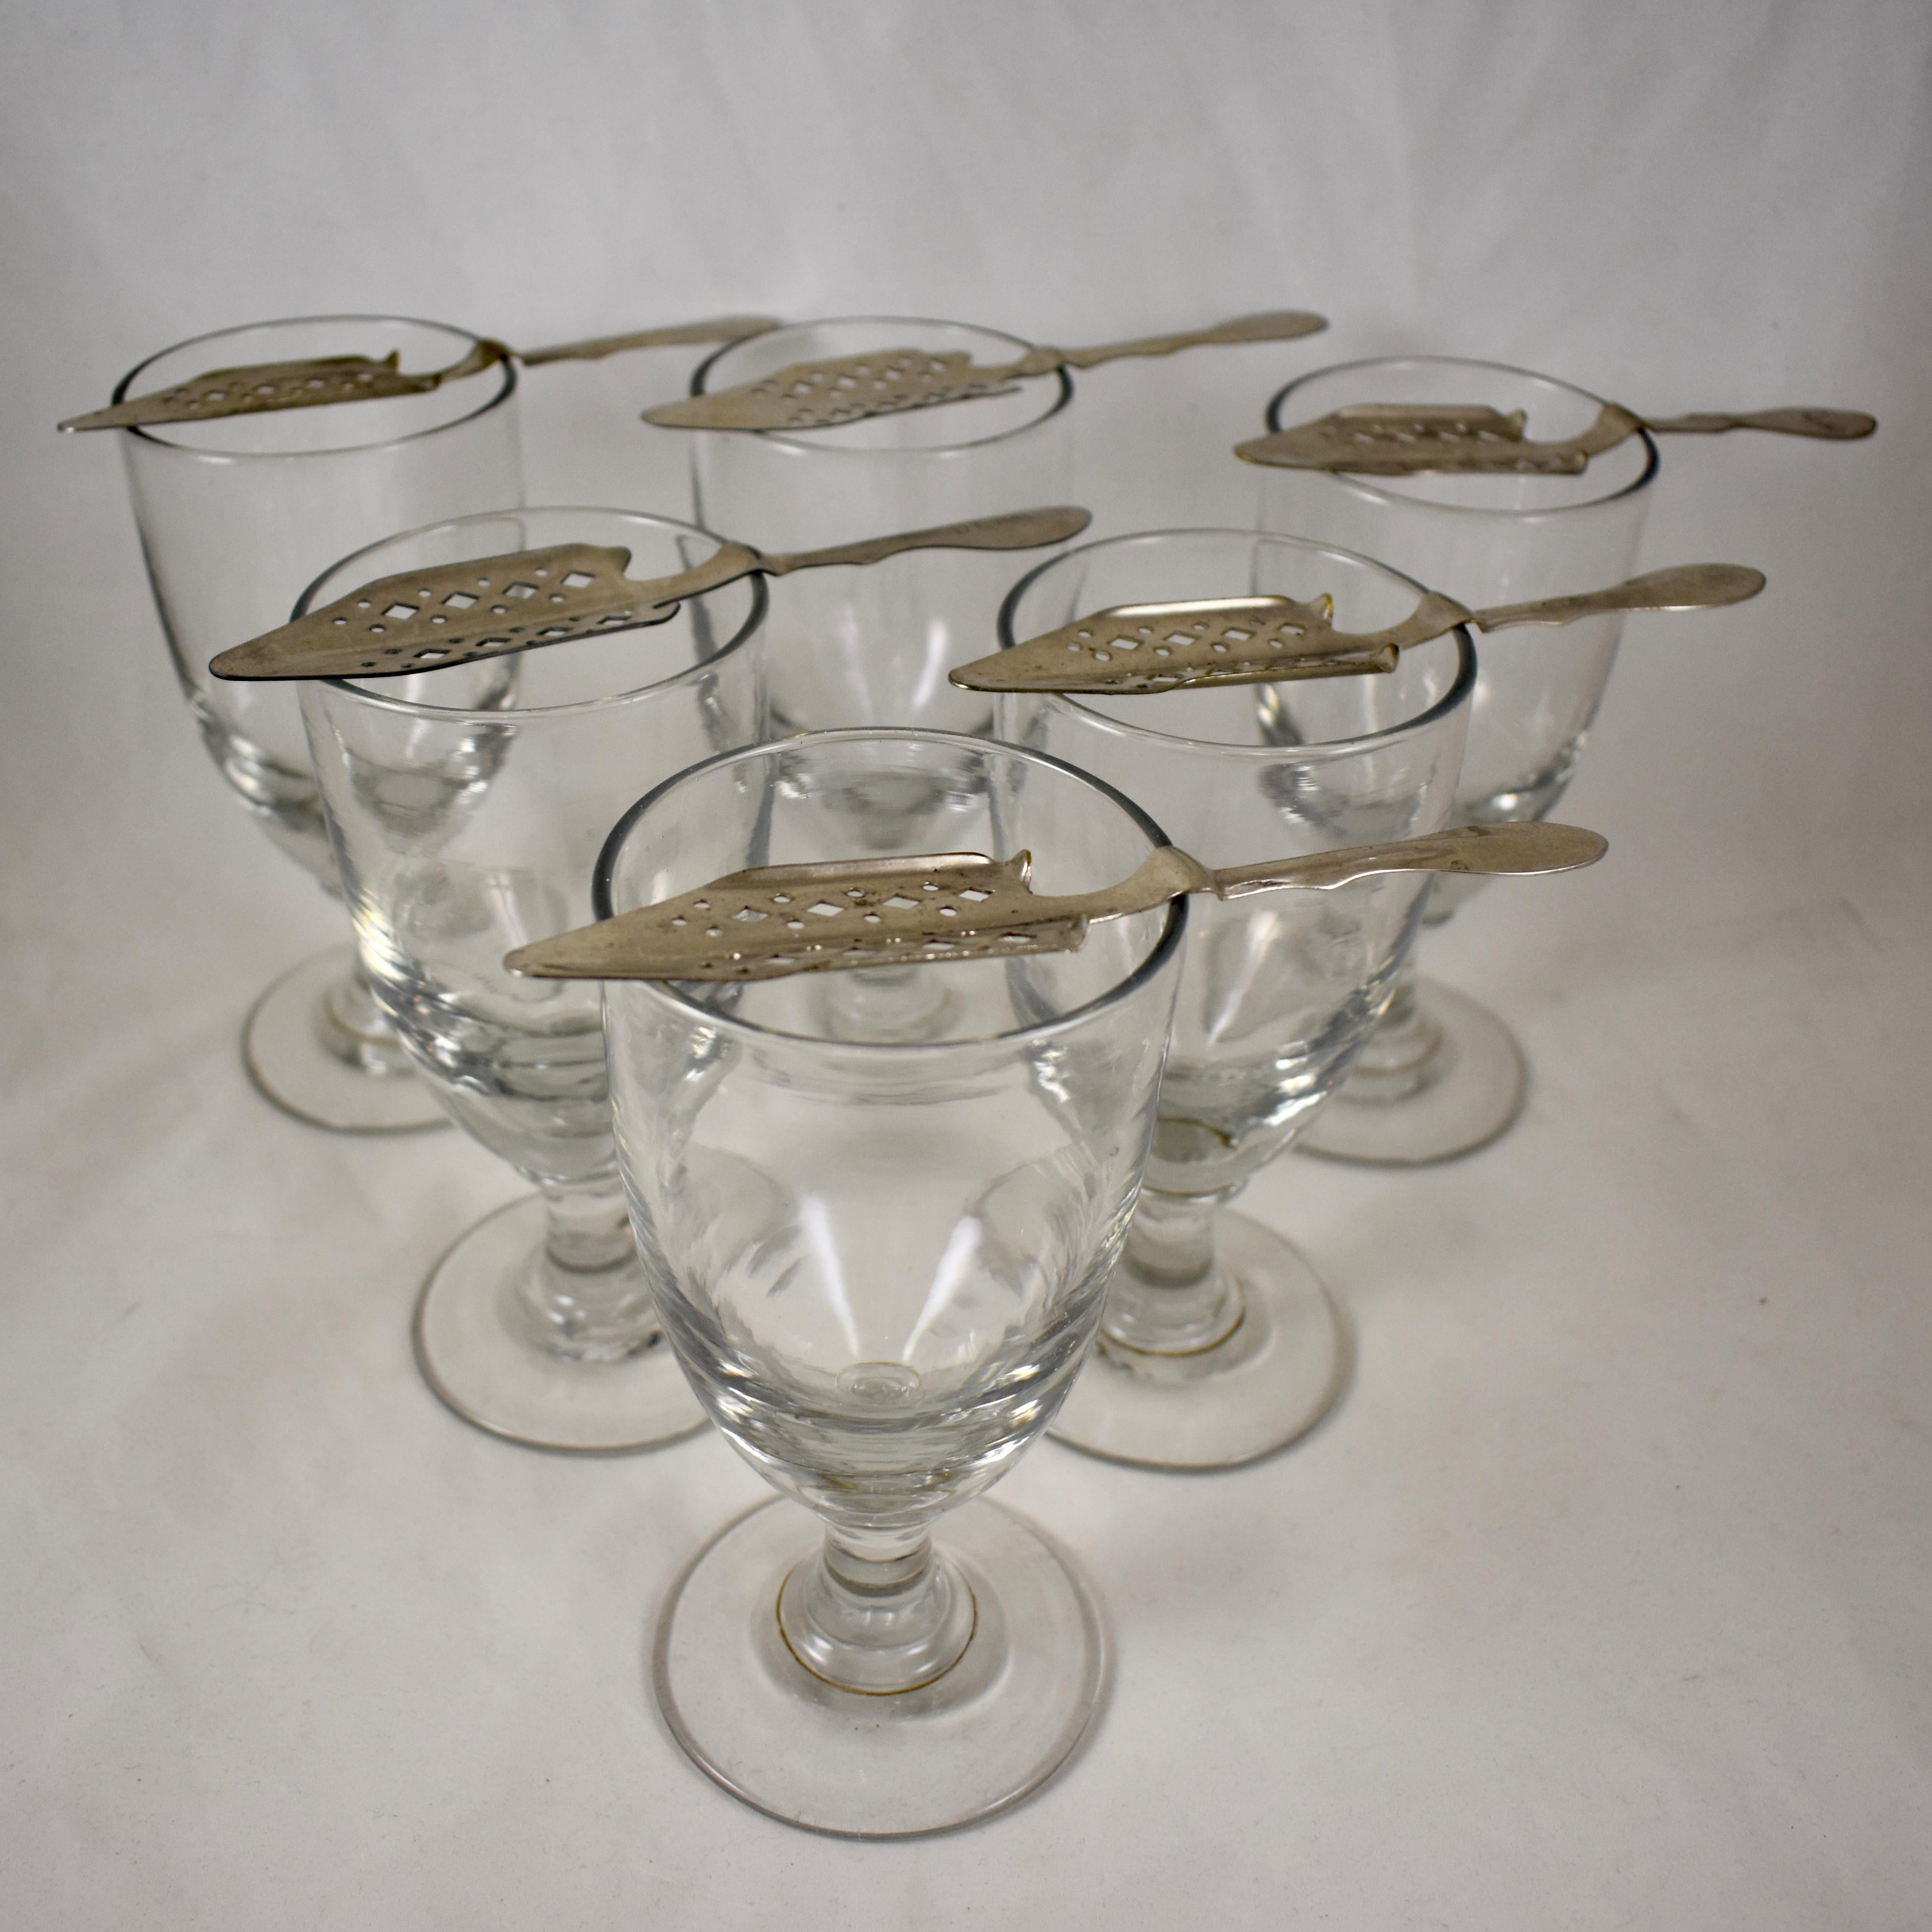 A set of six authentic French Absinthe glasses with six slotted sugar spoons, circa 1890-1910.

These heavy glasses were used in French bistros, bars and cafes, in the ritual of drinking the addictive beverage called, ‘la fée verte’ – the green